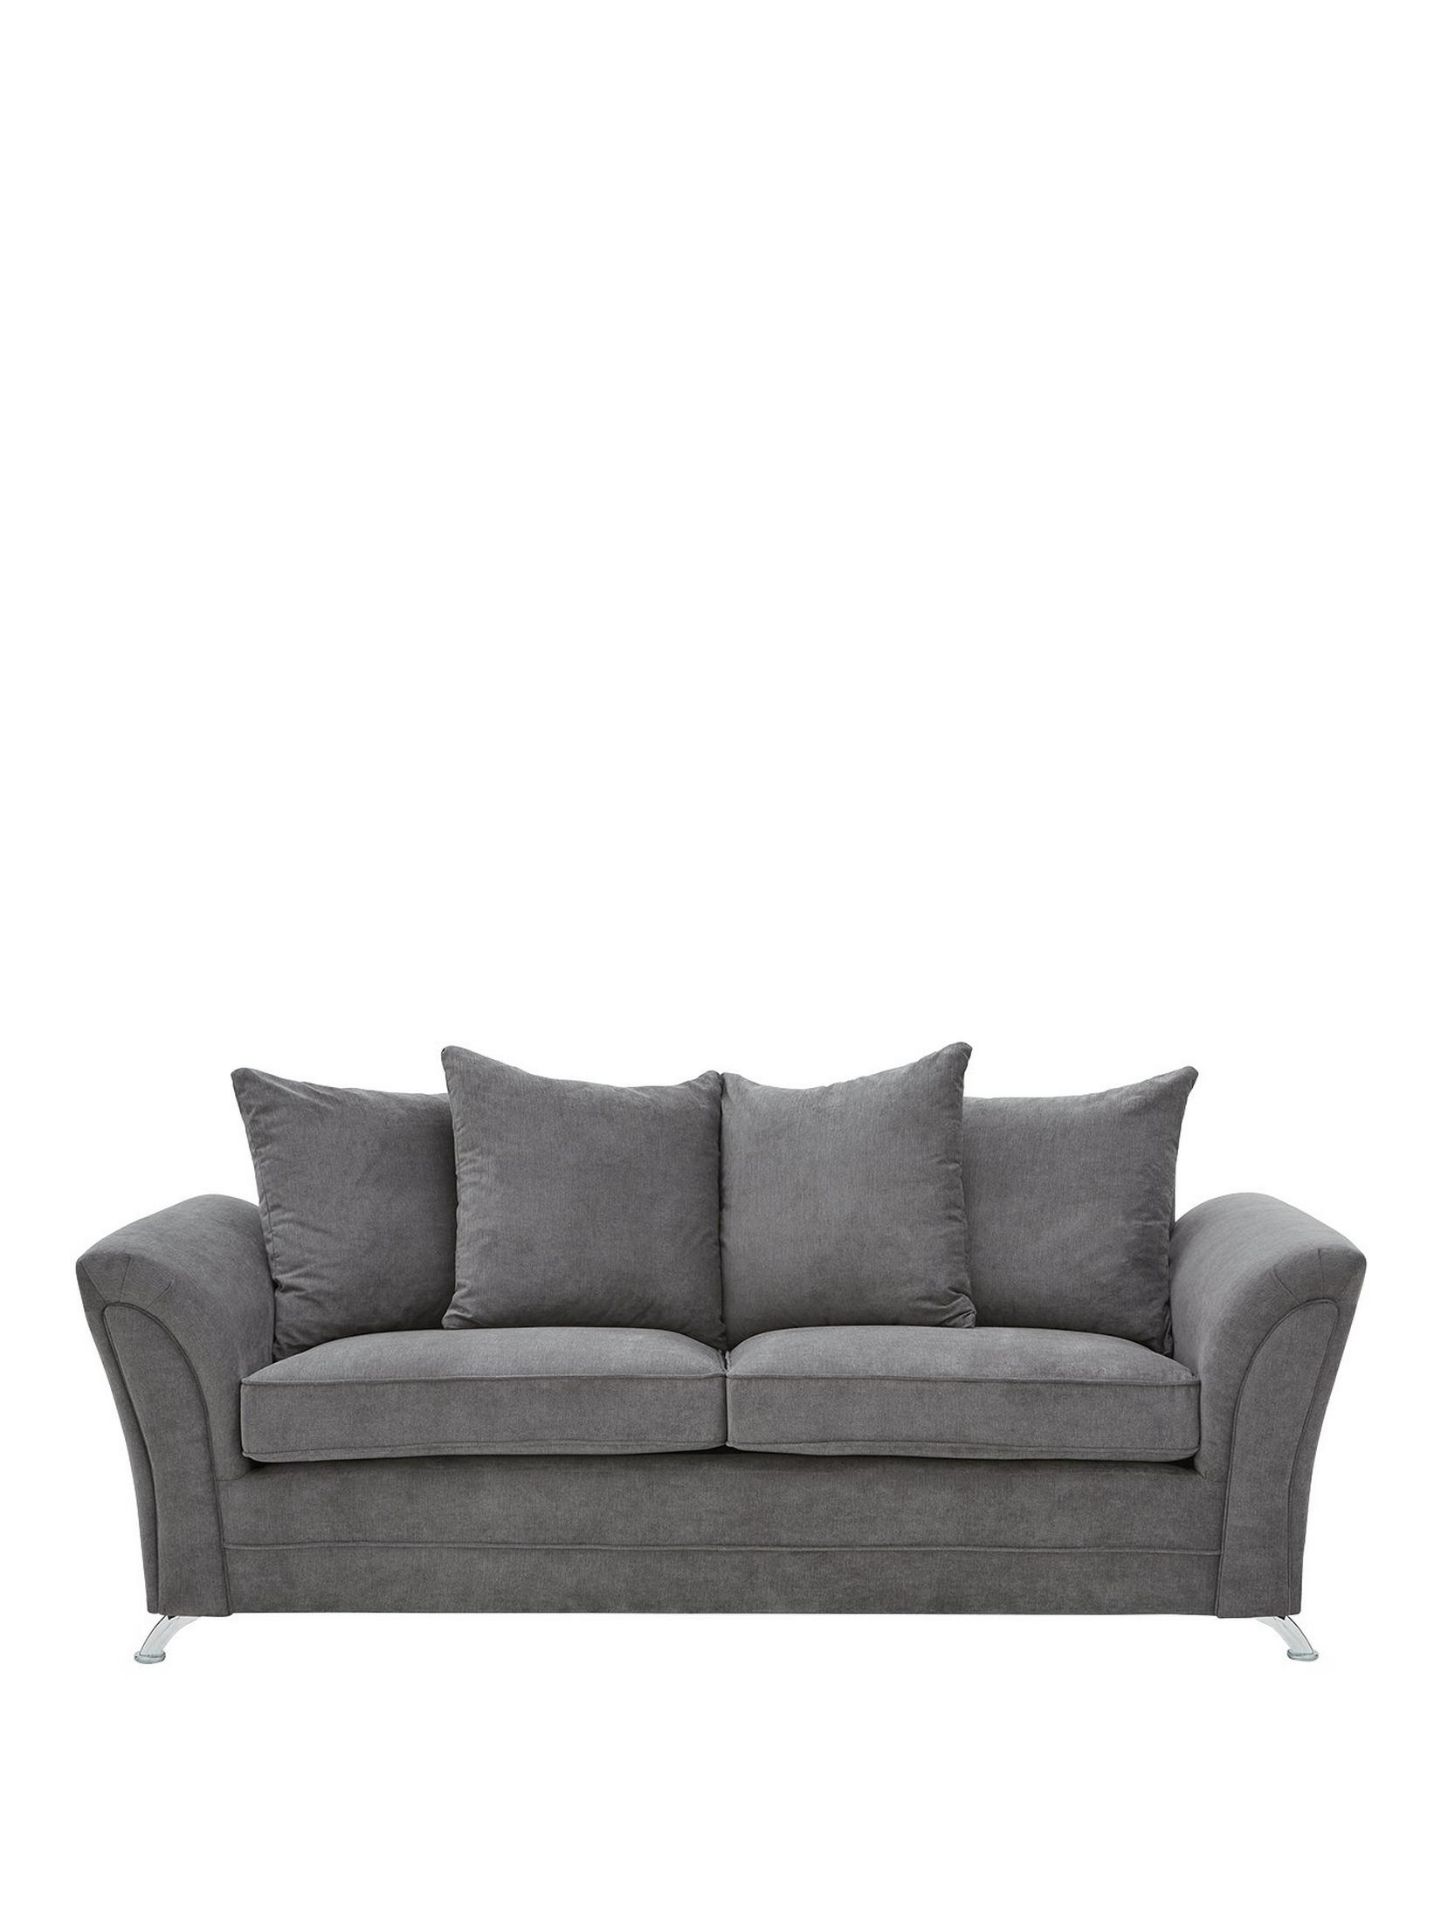 Dury 3 Seater Sofa. RPP £499.00 . H 92 x W 205 x D 90cm Homely comfort Dury is upholstered in a - Image 2 of 3